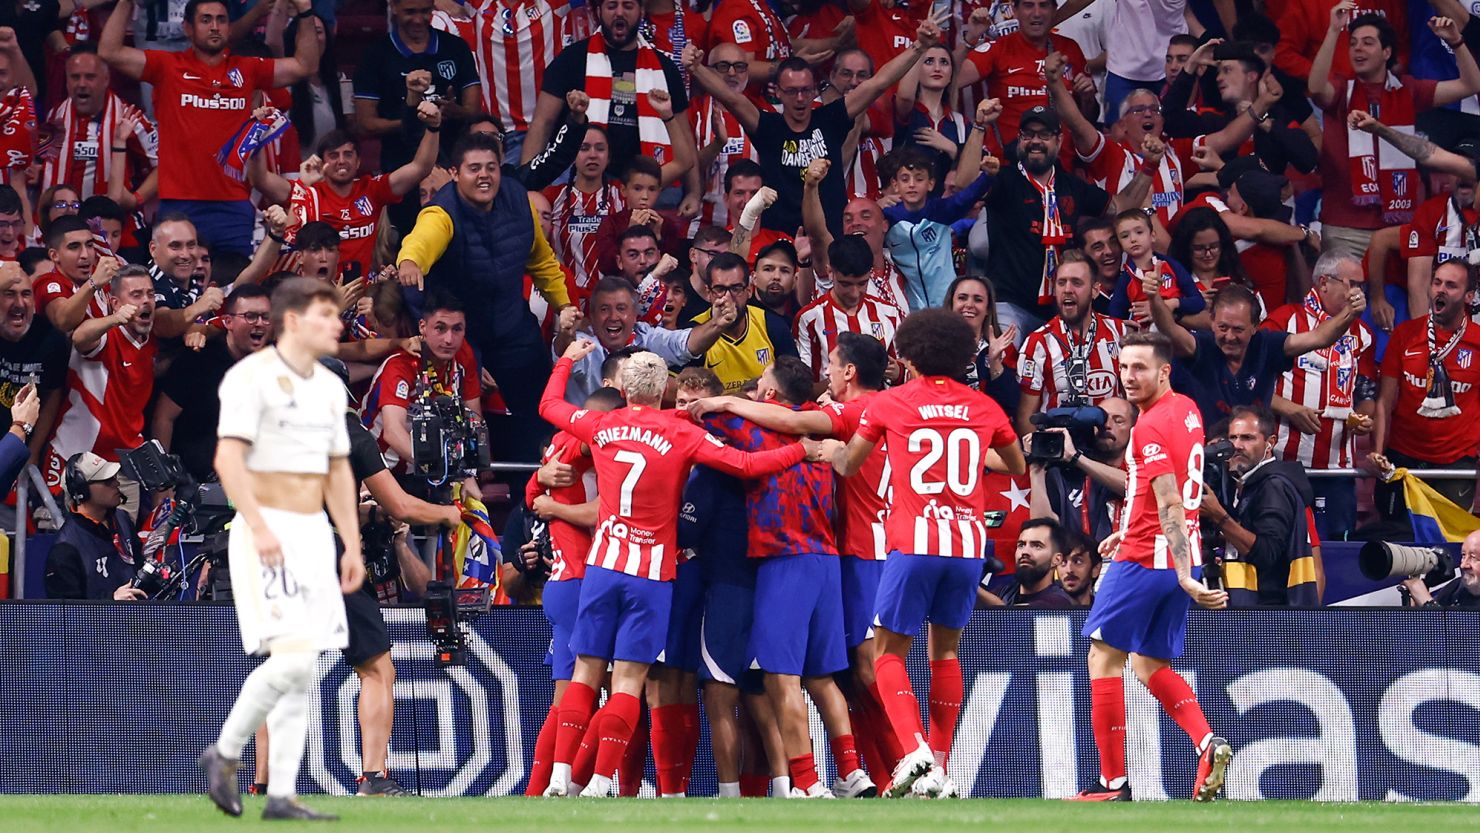 Real Madrid dominated by local rival Atlético Madrid in 3-1 derby